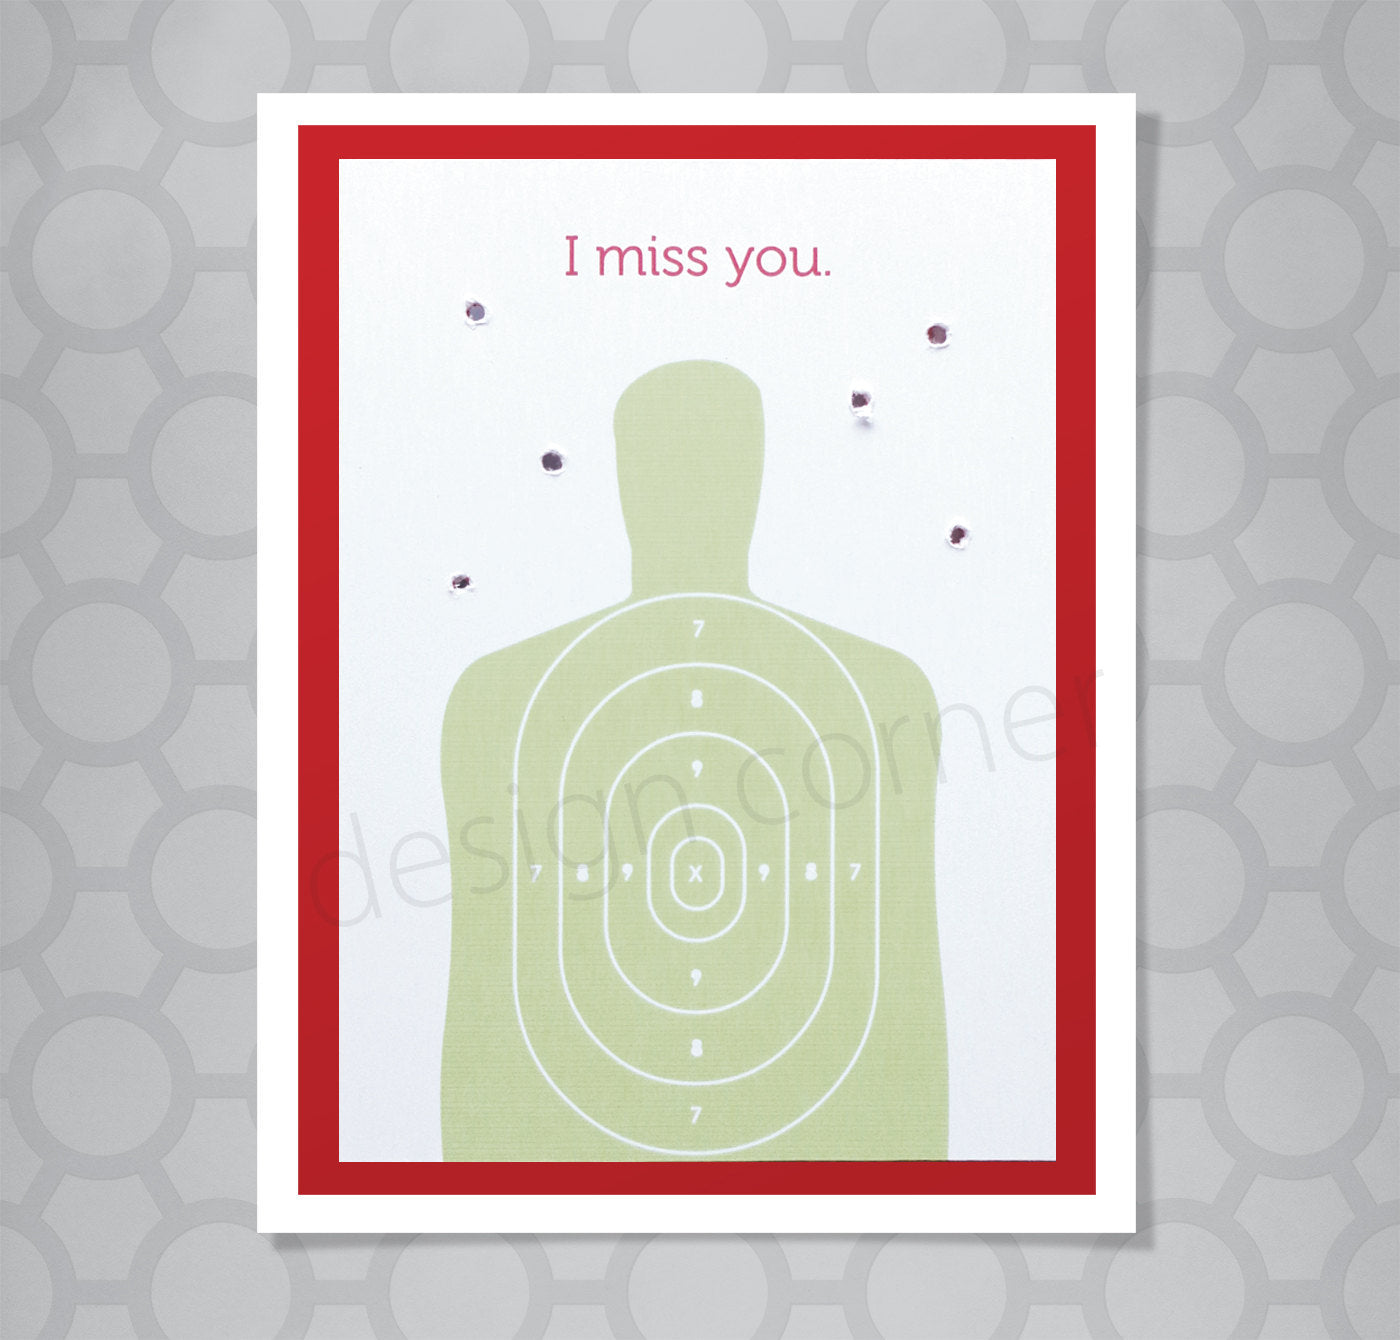 Image of target practice person with holes in card around it on greeting card with caption I miss you